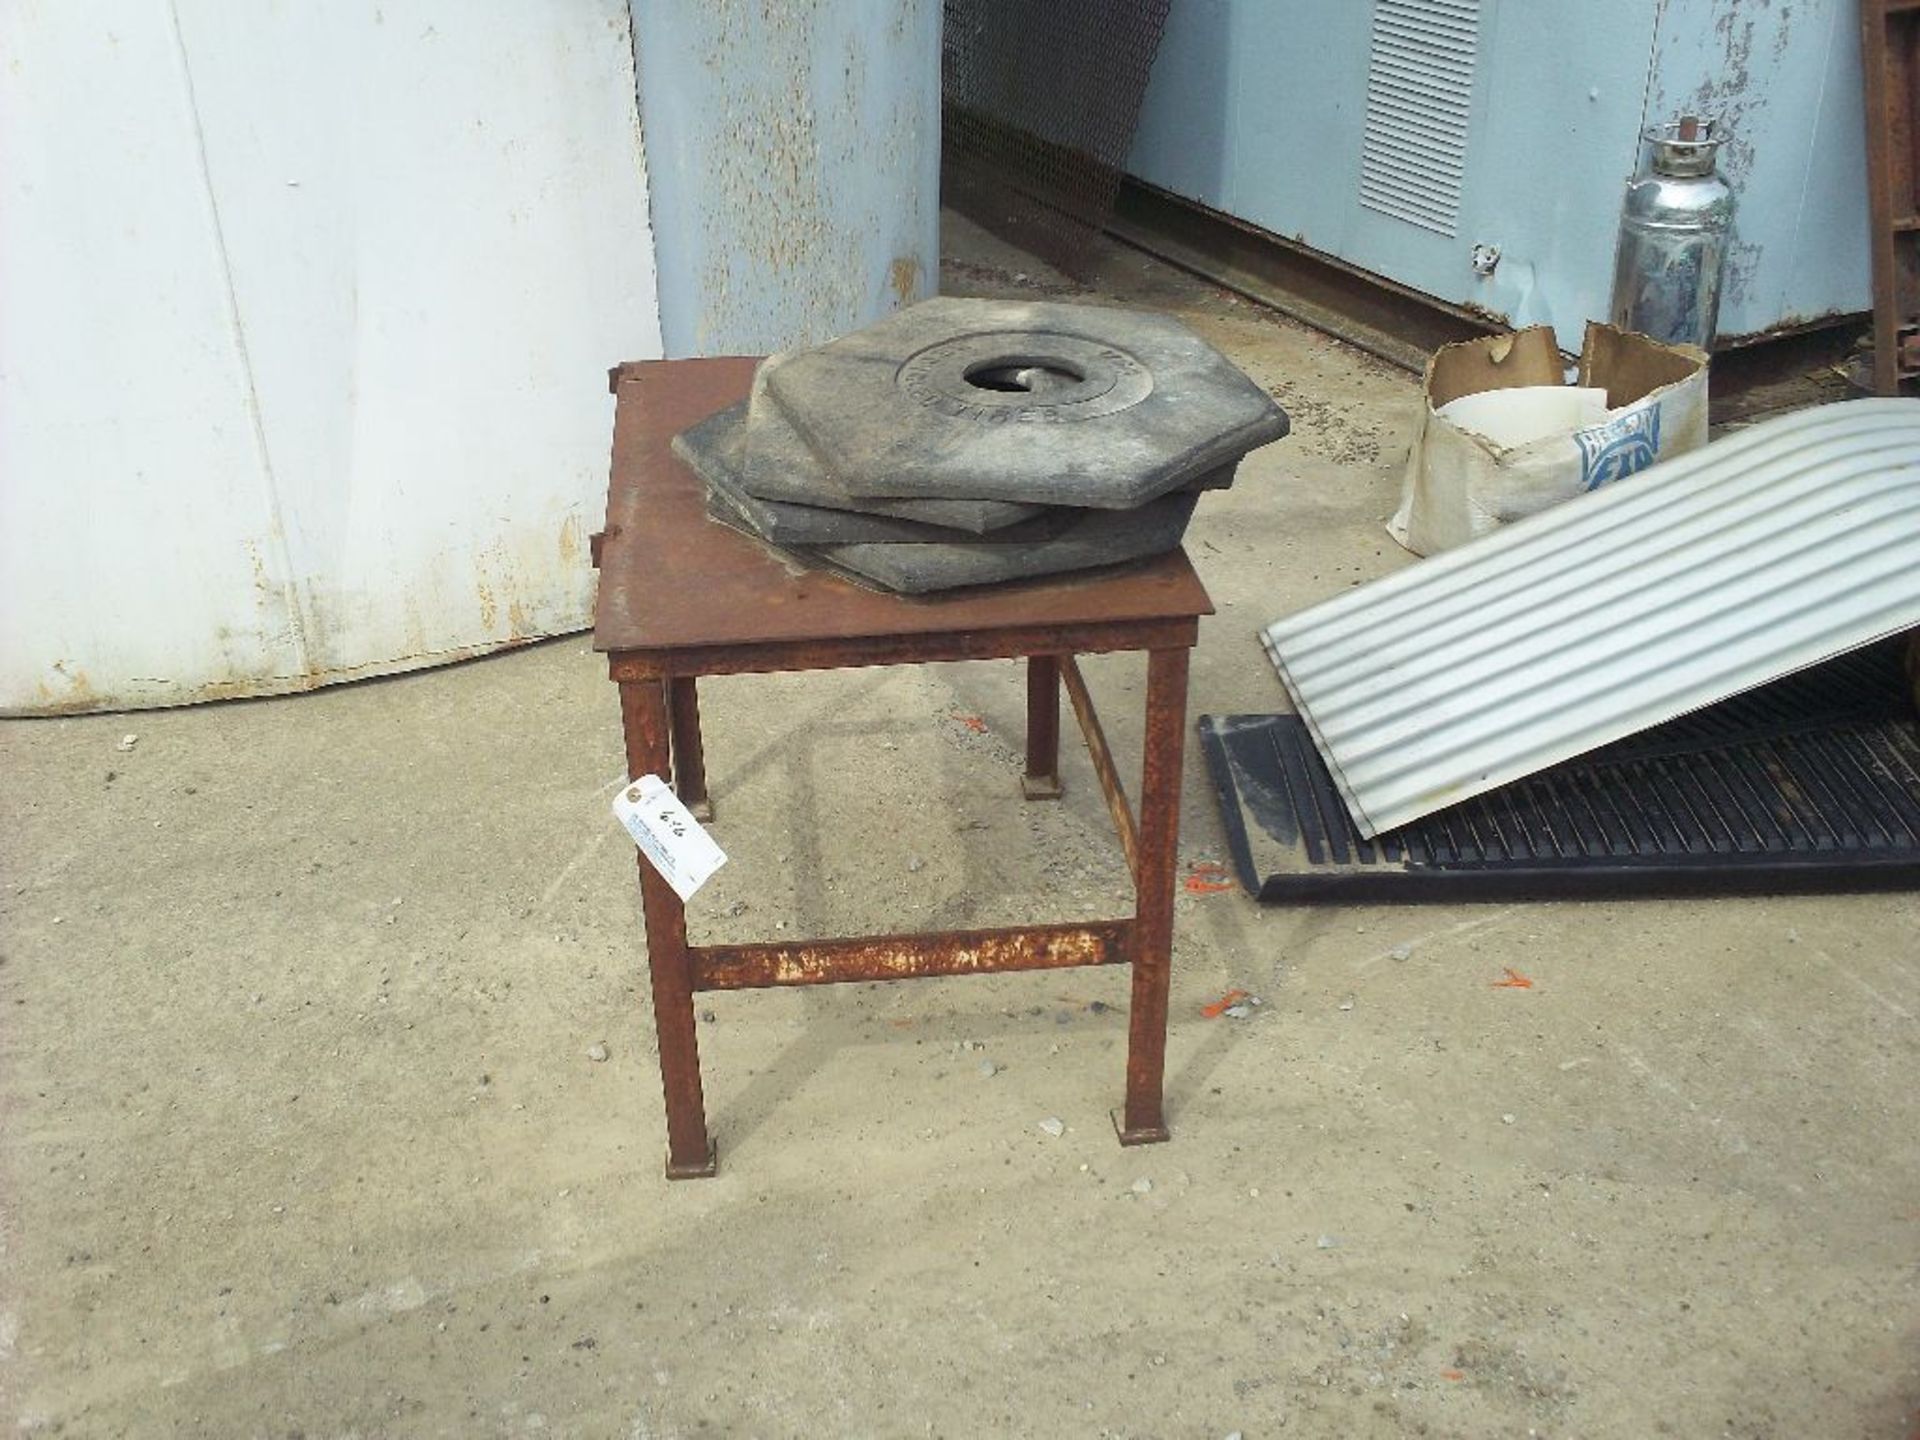 Metal table, safety cone weights.